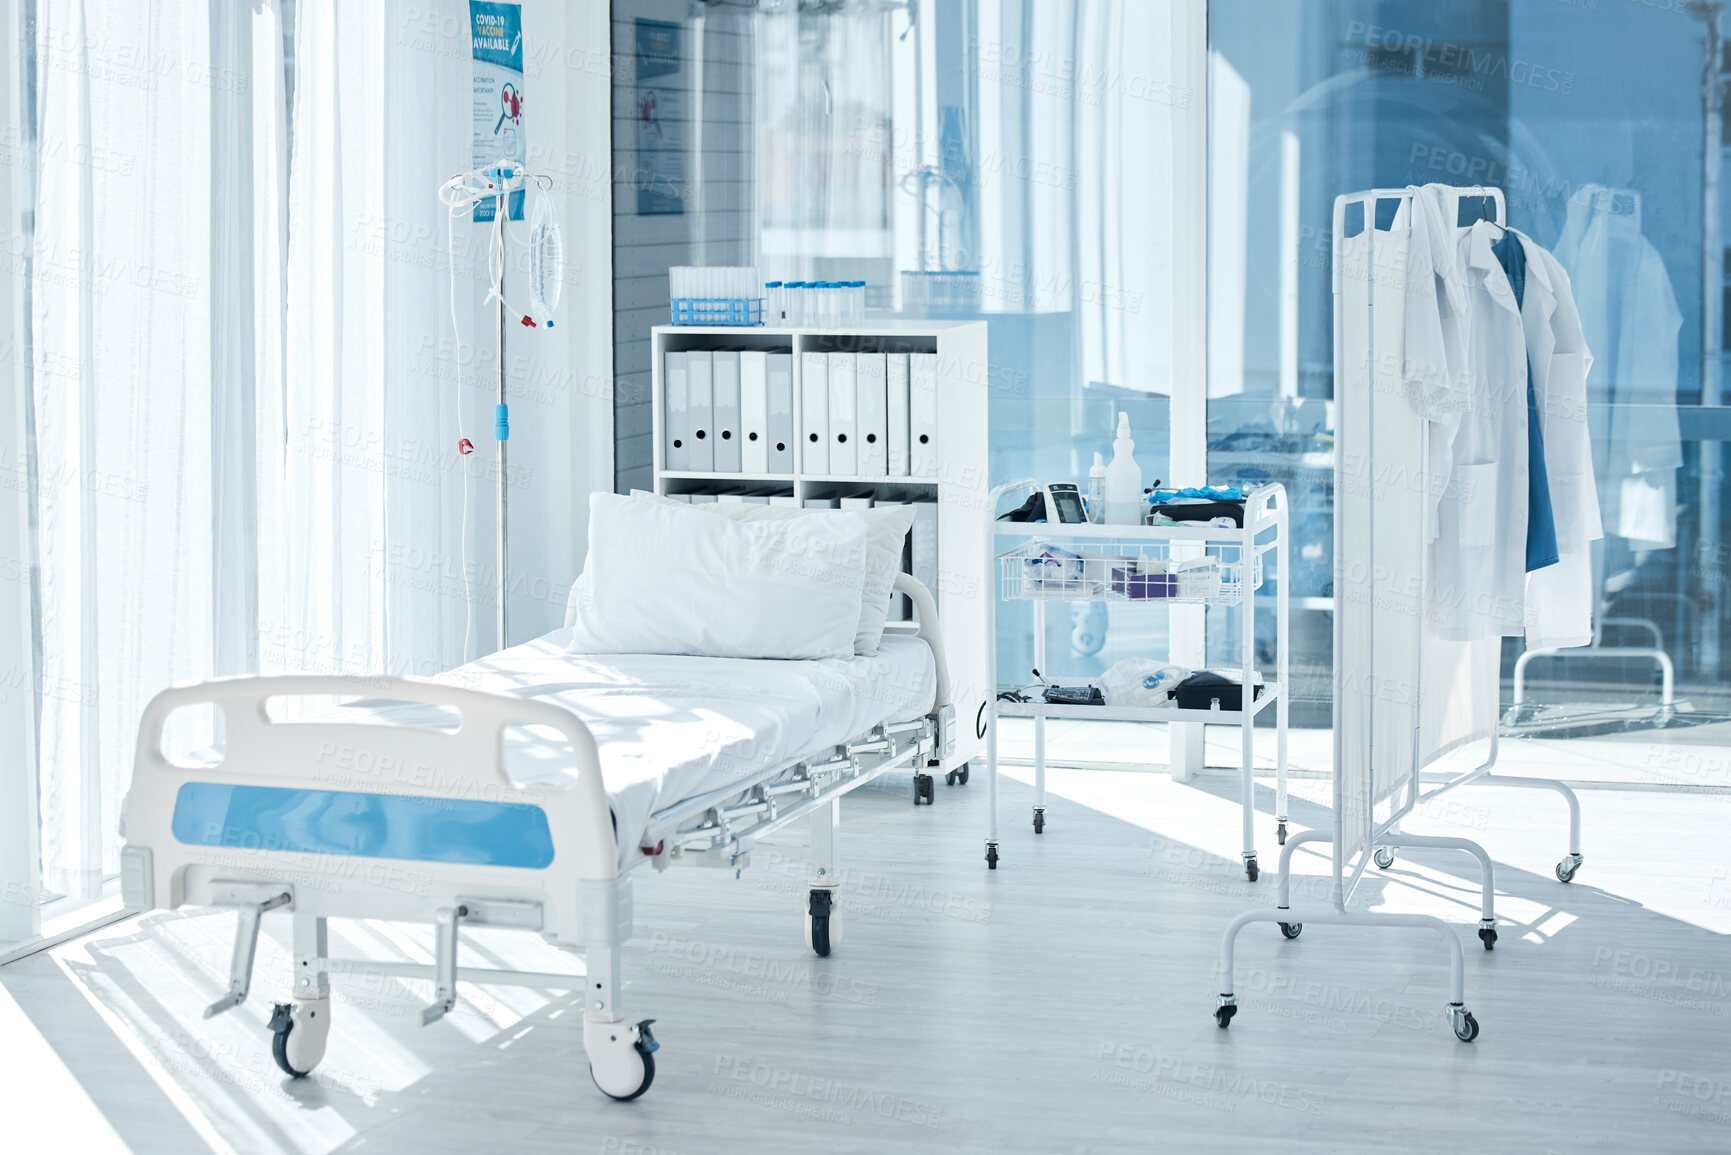 Buy stock photo Backgrounds of empty patient room, bed and private healthcare facility, hospital and medical center of consulting, healing and rehabilitation. Furniture interior, clinic bedroom and health care space